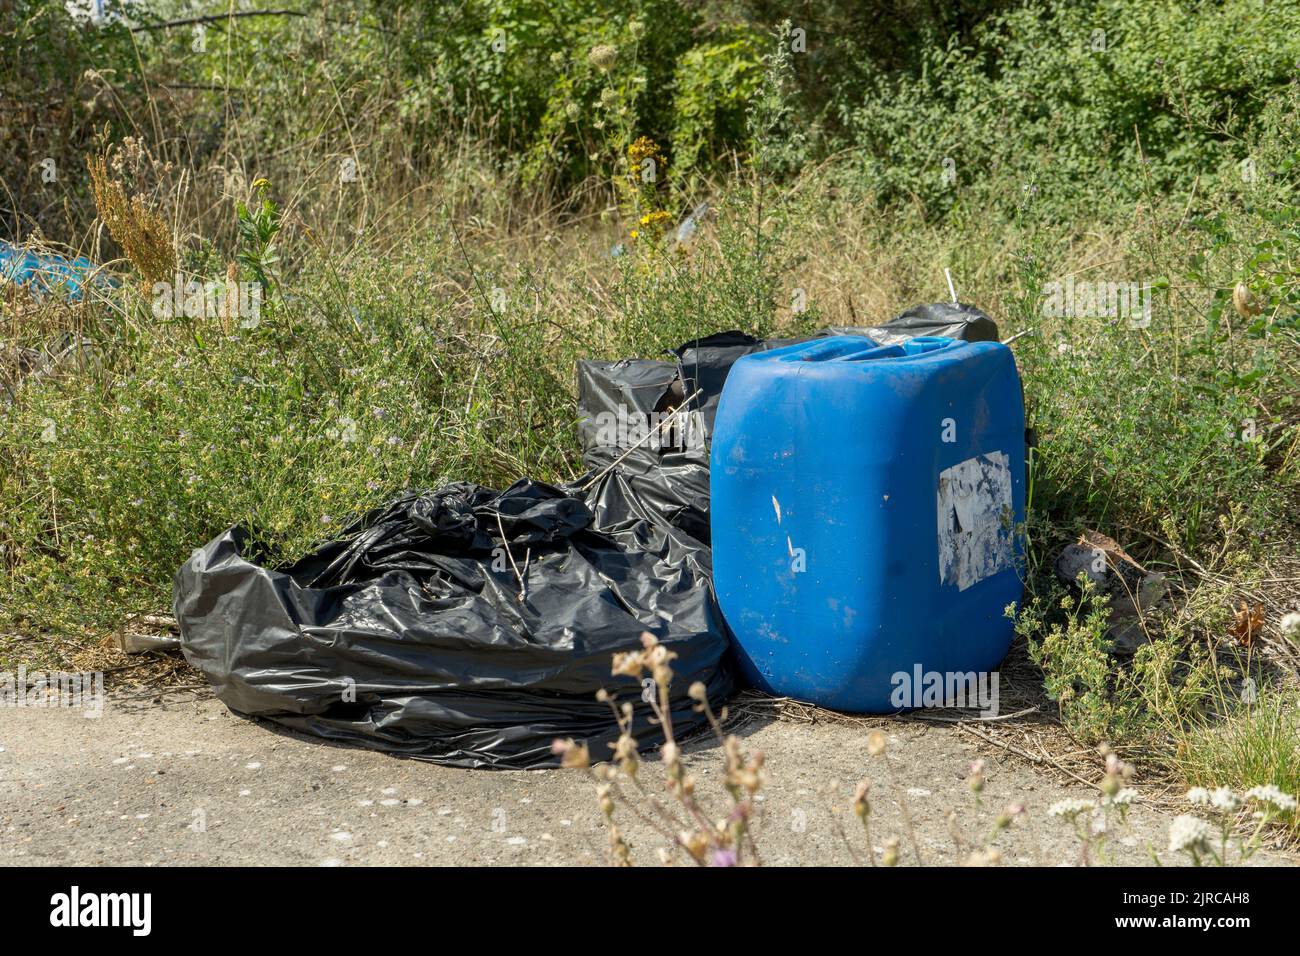 in nature Illegal dumped garbage Stock Photo